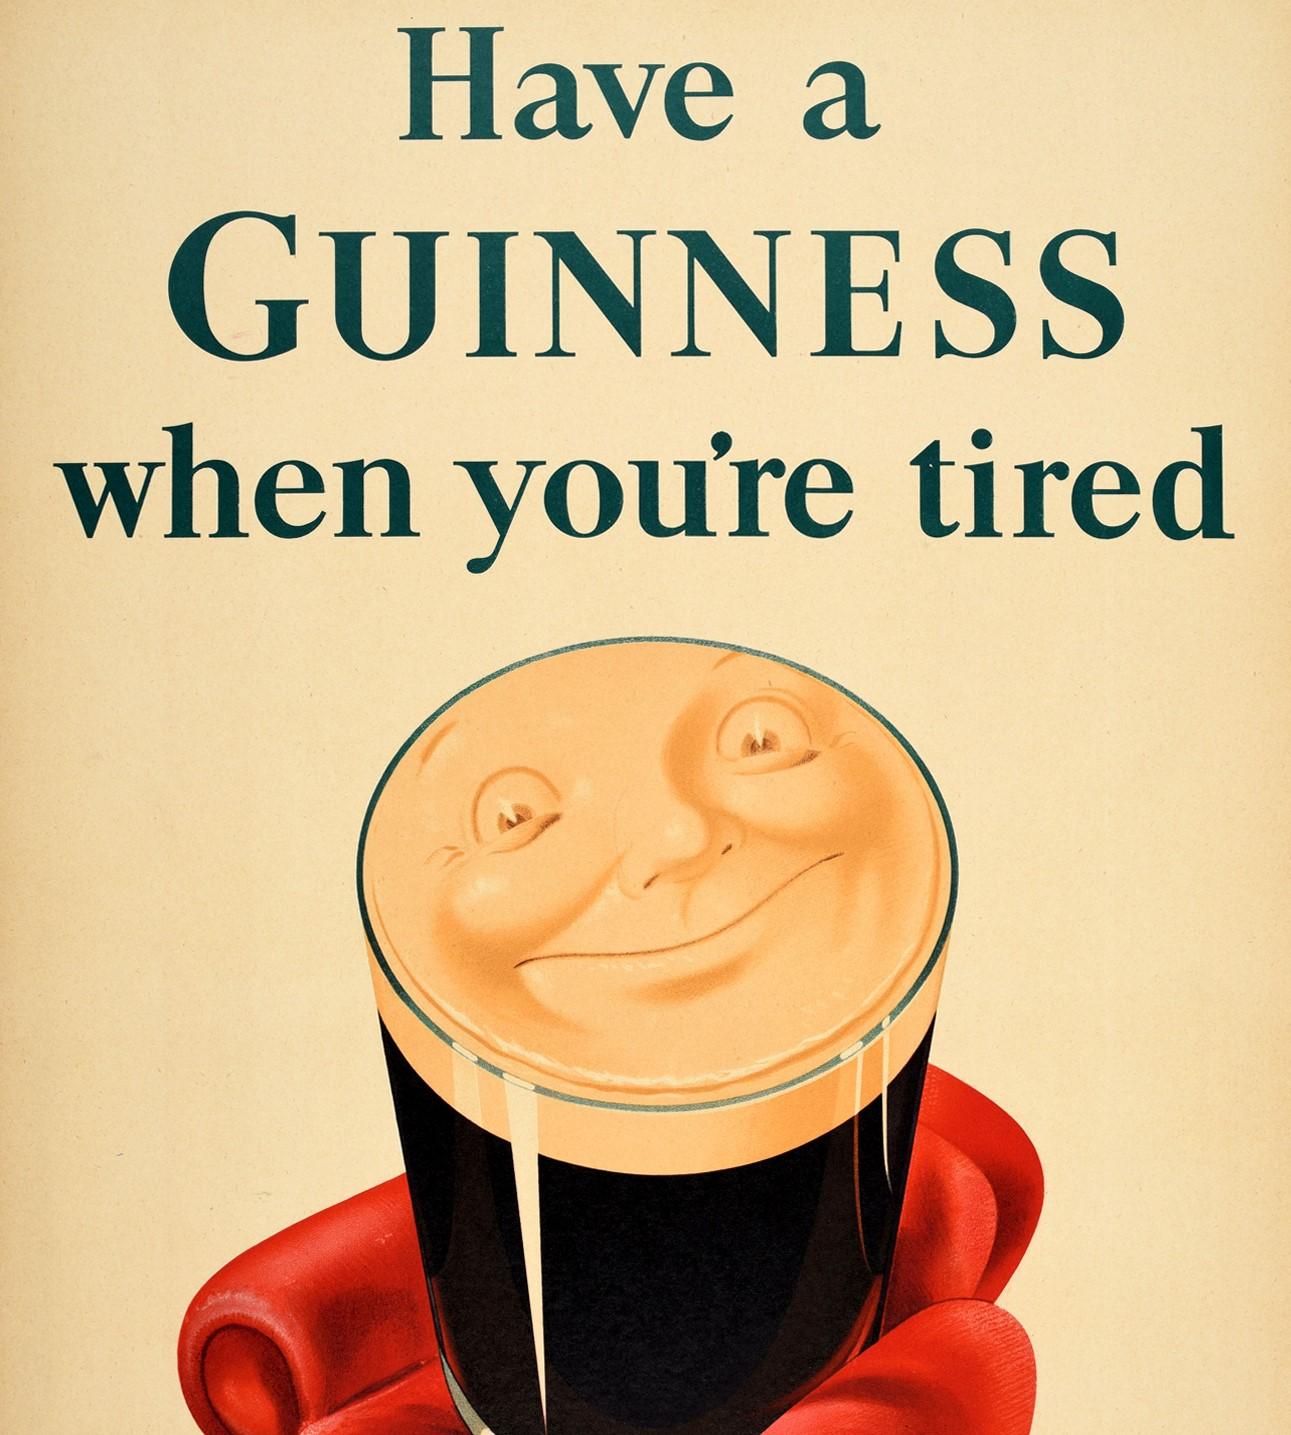 guiness poster